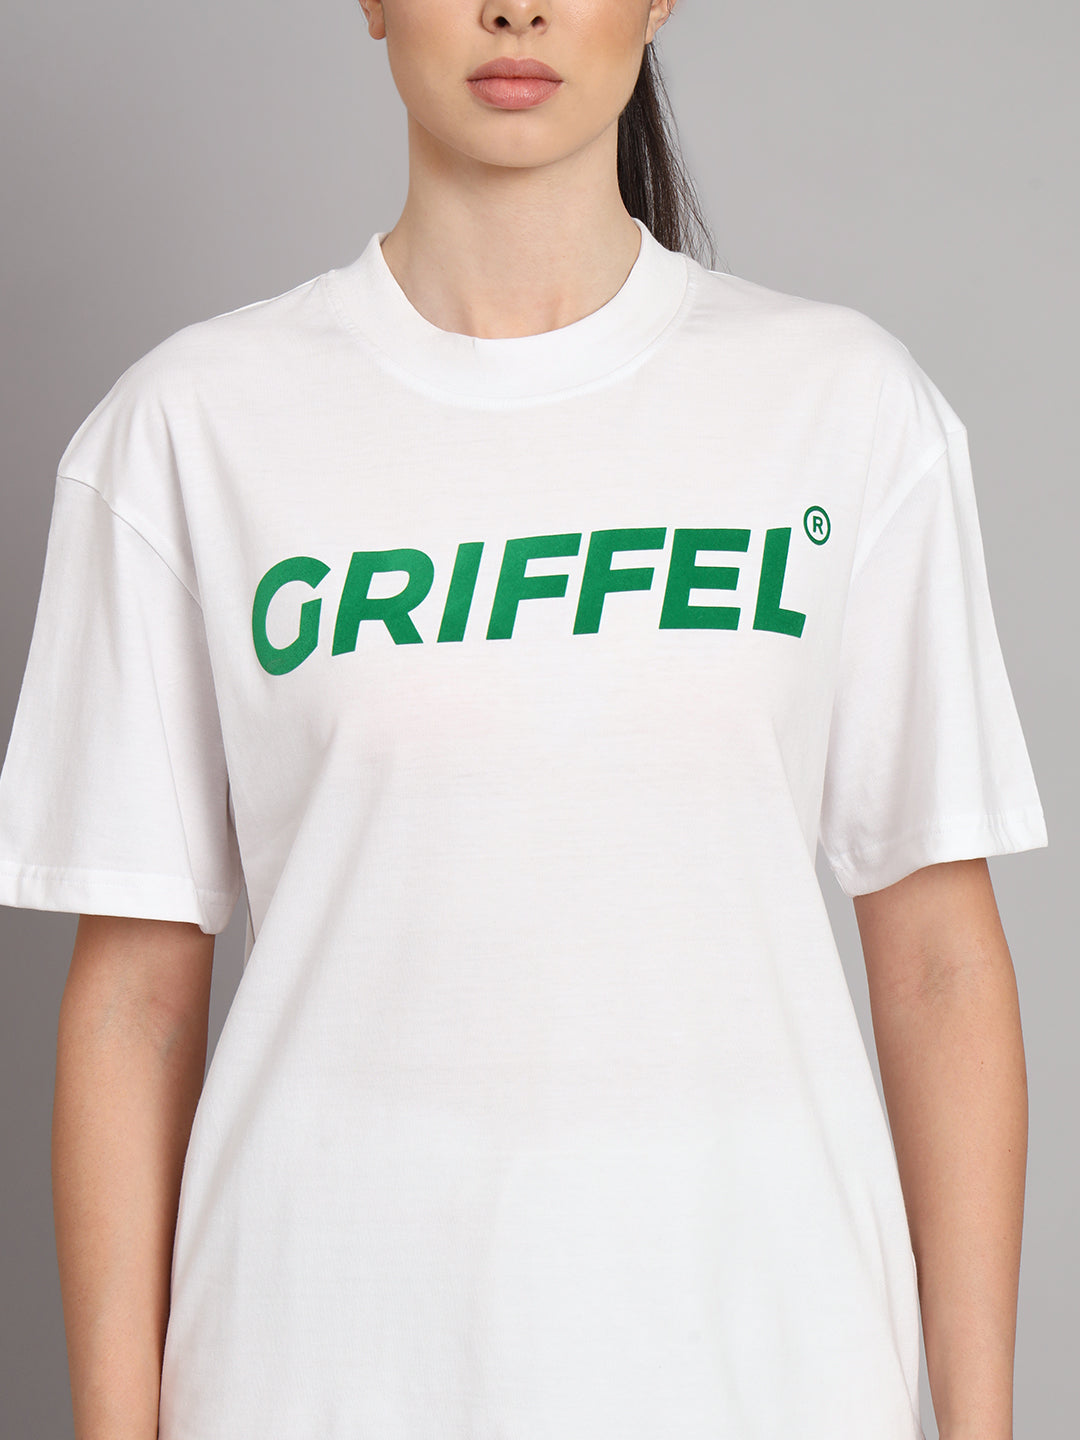 GRIFFEL Women Printed Loose fit White T-shirt - griffel